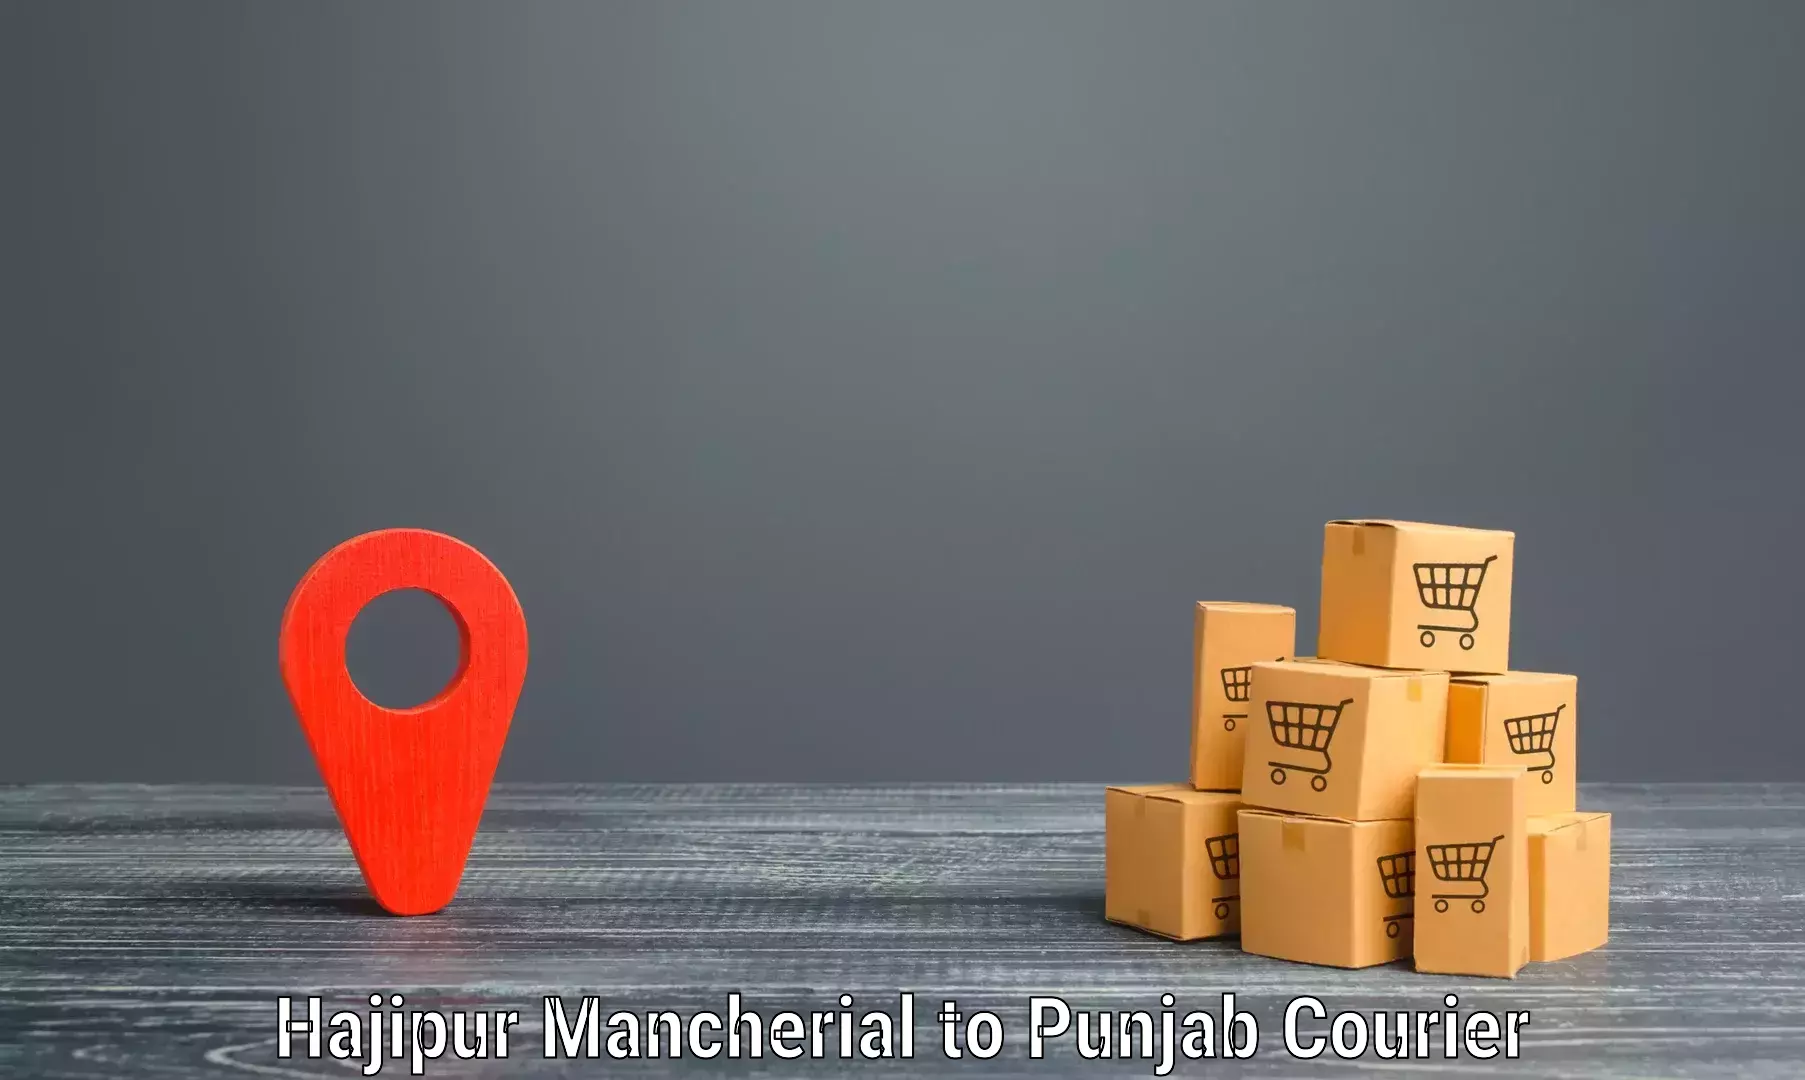 Automated shipping processes Hajipur Mancherial to Sangrur